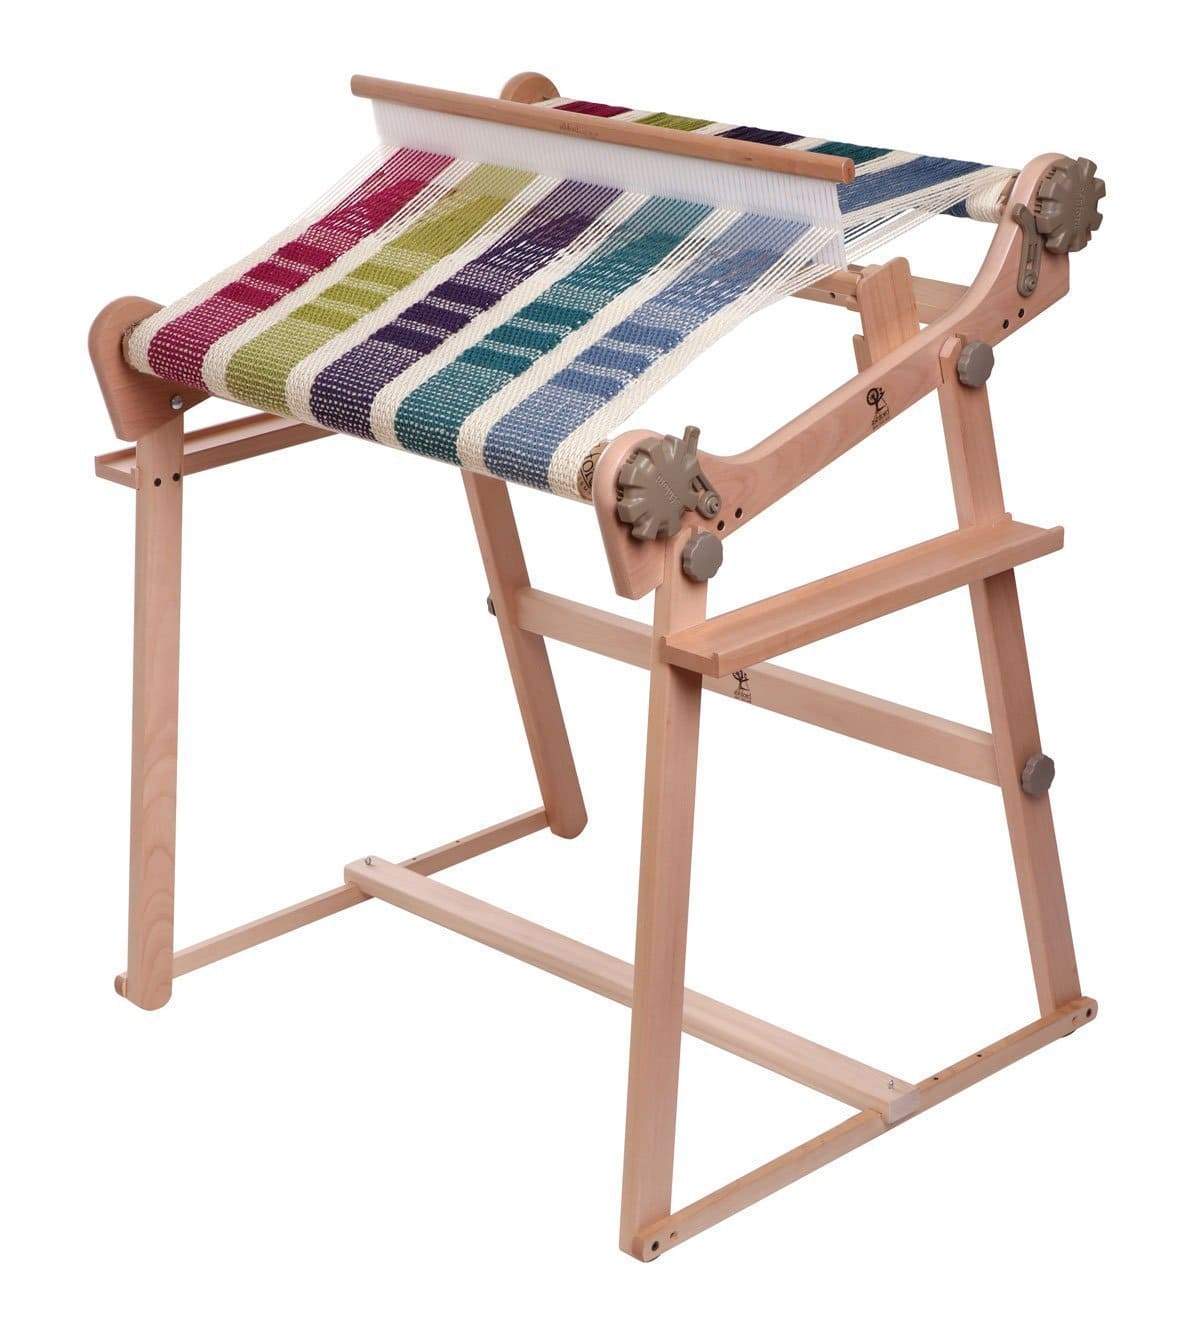 20 of the best Yarn Winder products for knitting and crochet